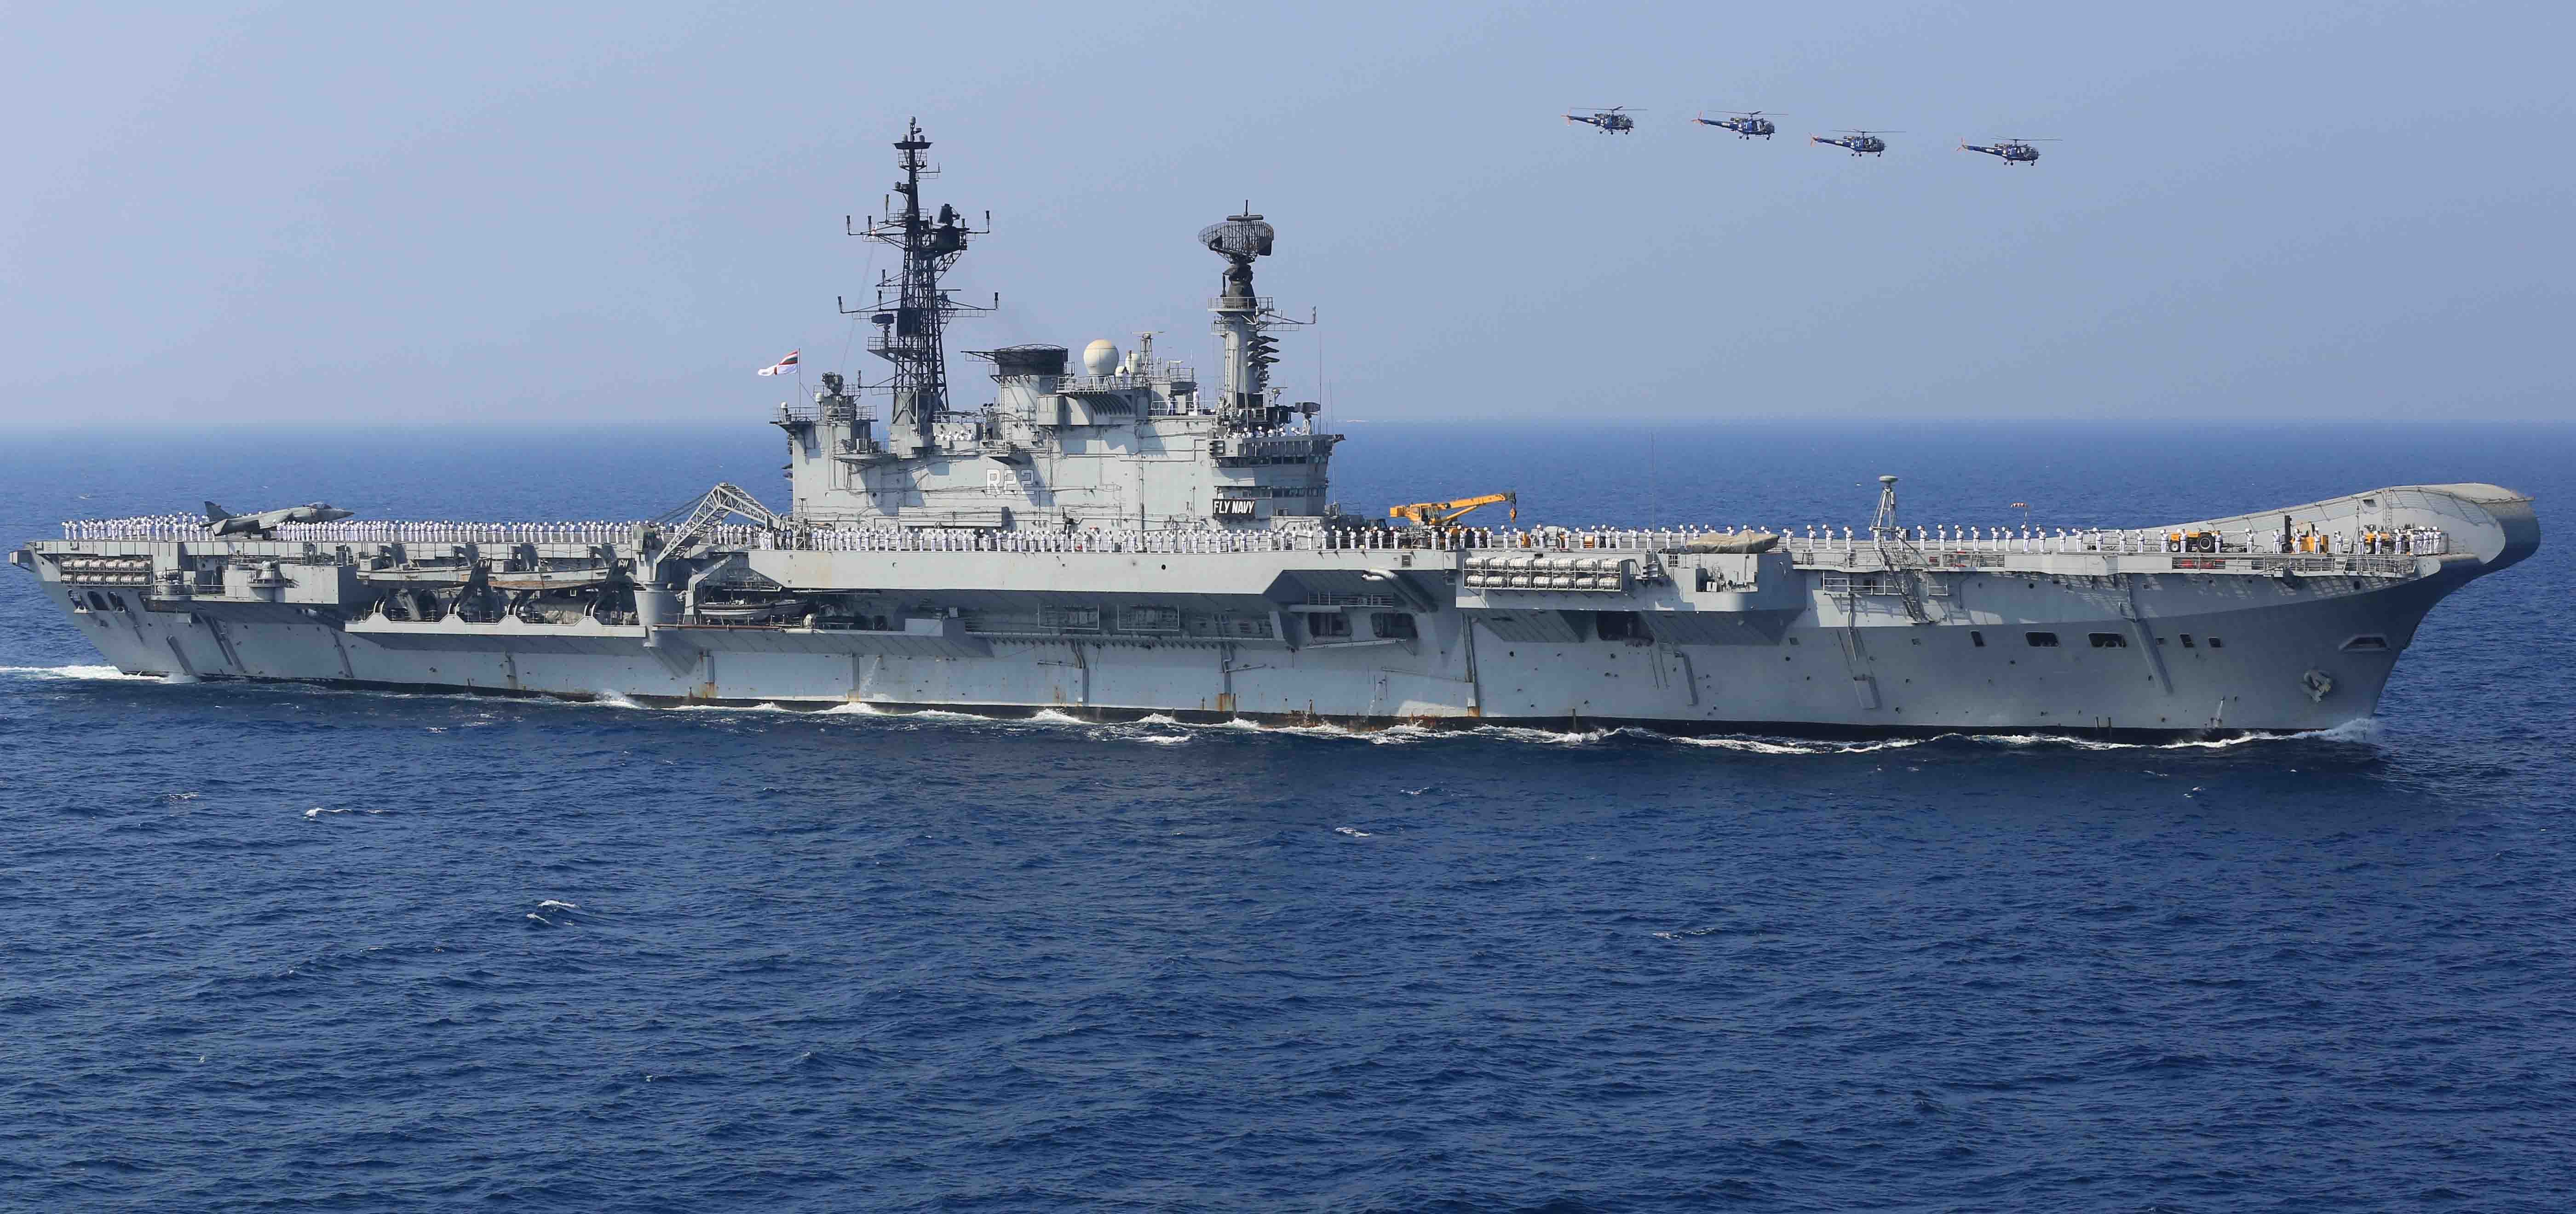 INS Viraat, One Of Indian Navy's Two Carrier Task Forces, Deployed At Sea During TROPEX 2015 Testing Network Centric Operations And Large Scale Op Logistics Capability [5600x2640]